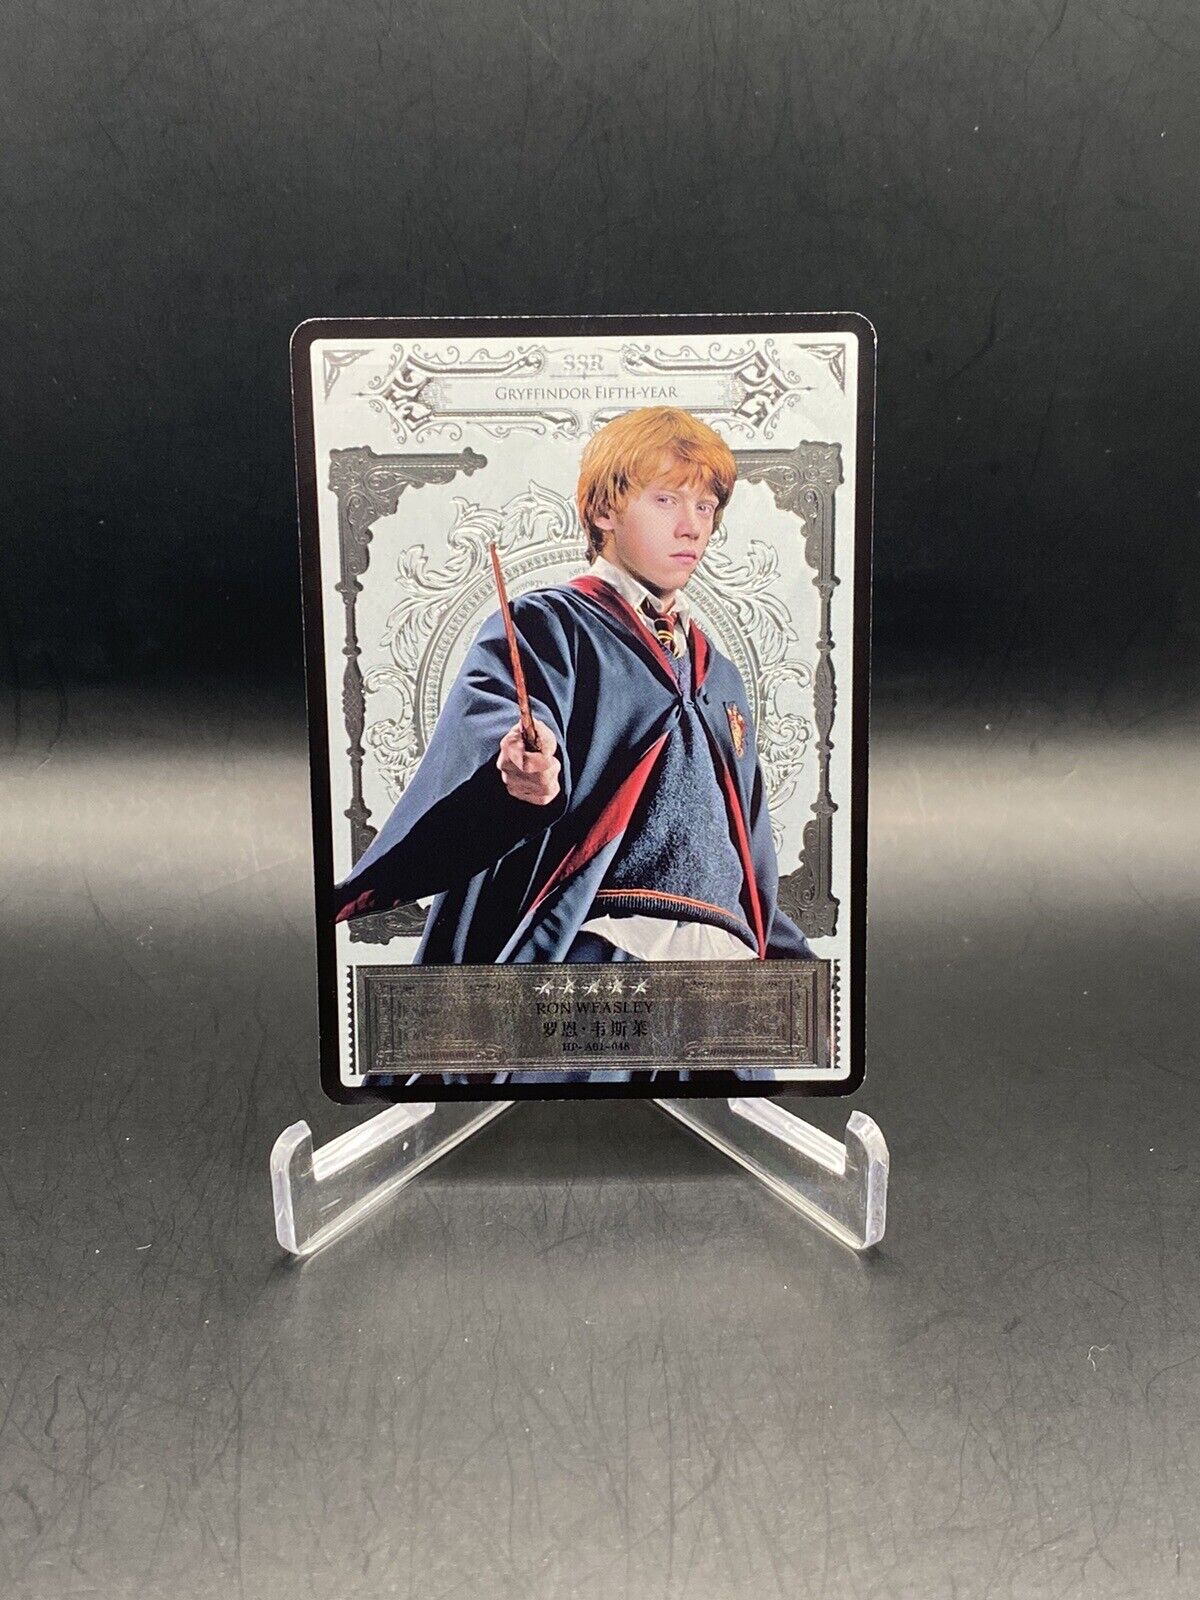 Kayou Harry Potter Ron Weasley SSR Gryffindor 5th Year 1st Edition SP Chase